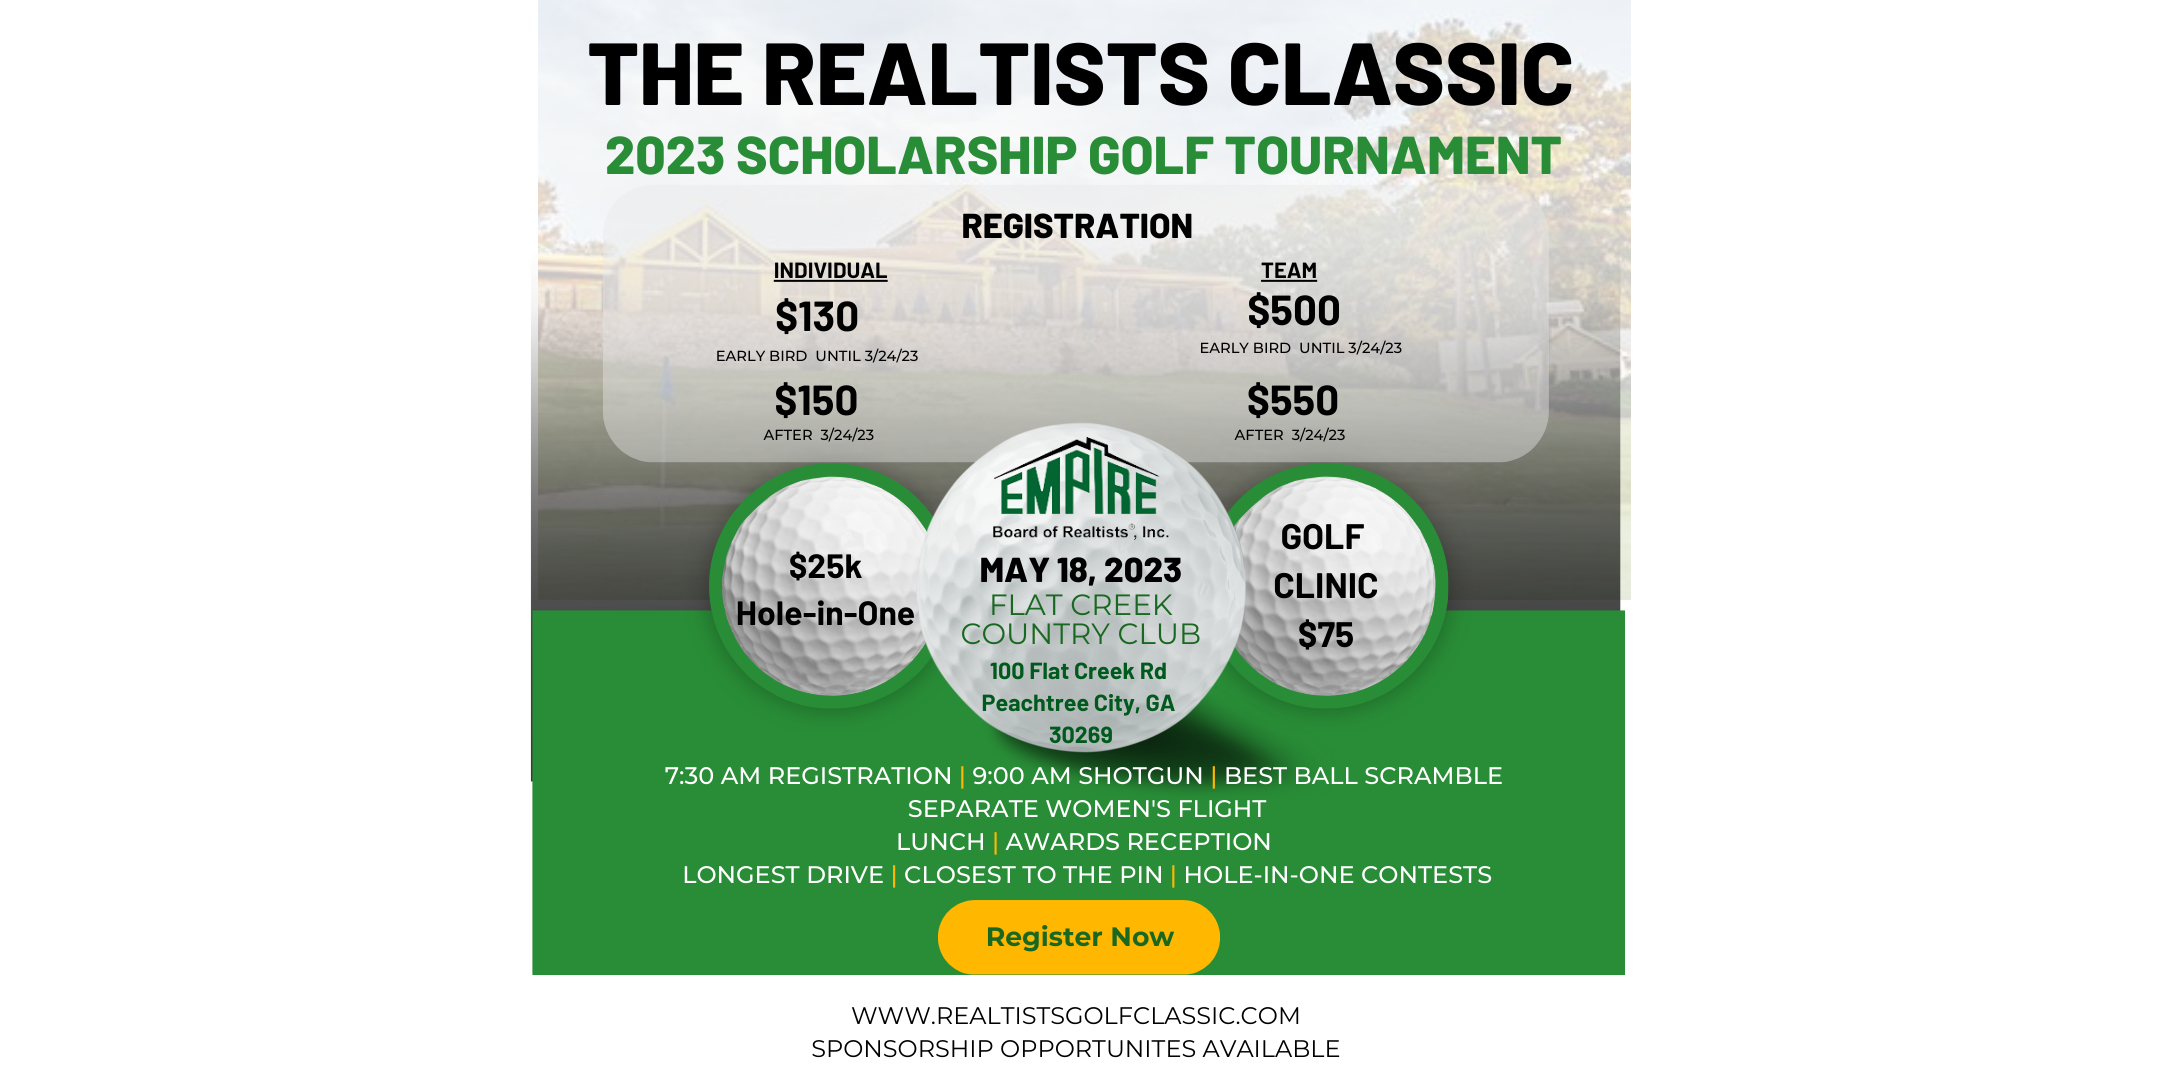 The Realtists Classic 2023 Scholarship Golf Tournament